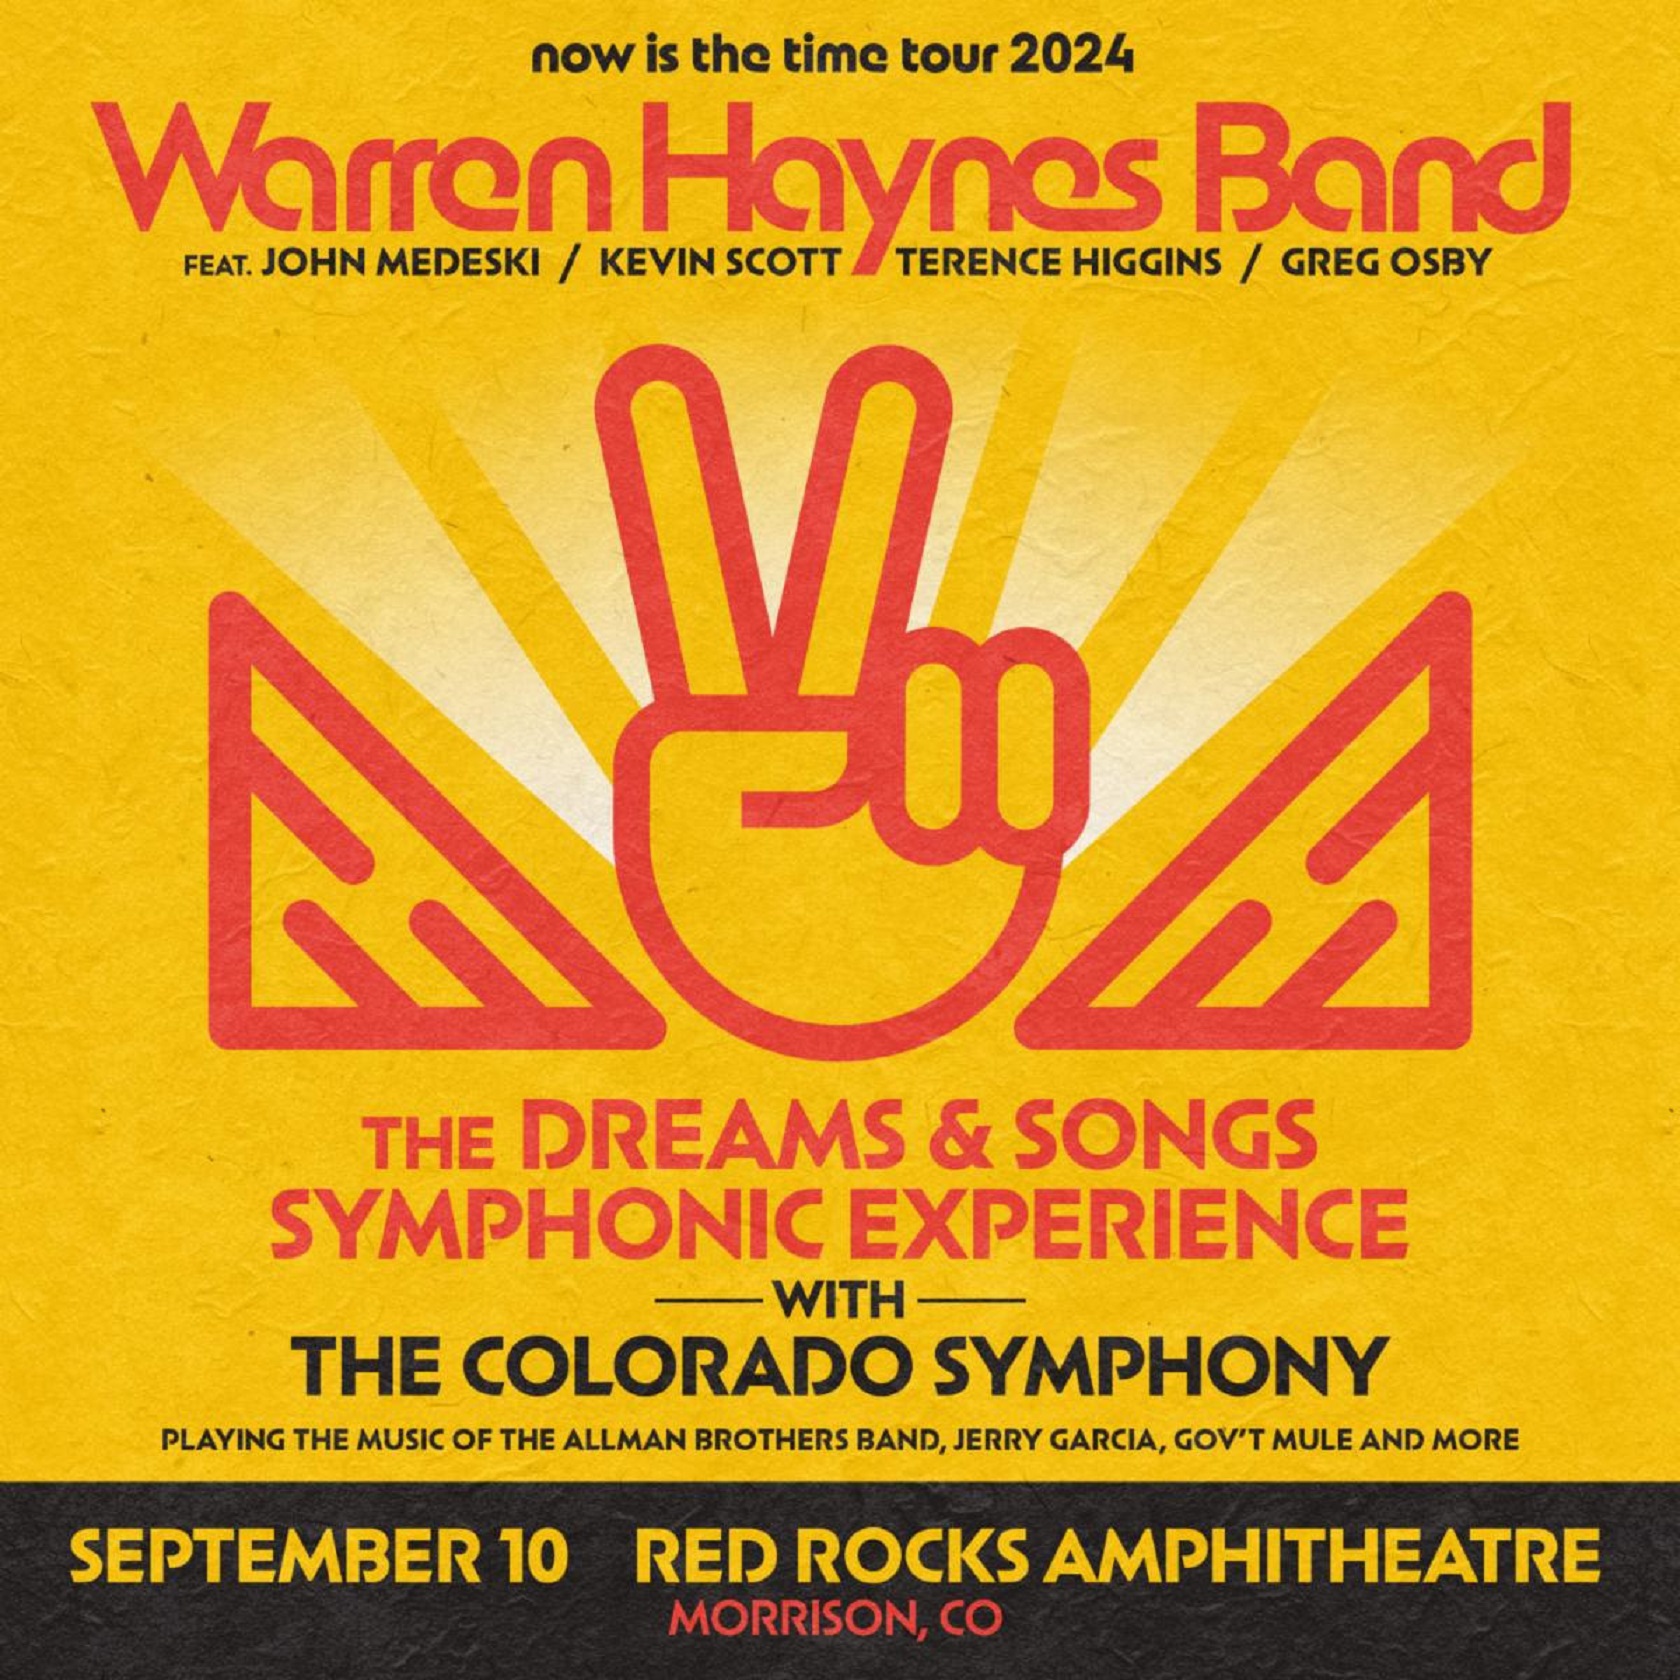 Warren Haynes Announces Red Rocks Show with the Colorado Symphony for September 10th